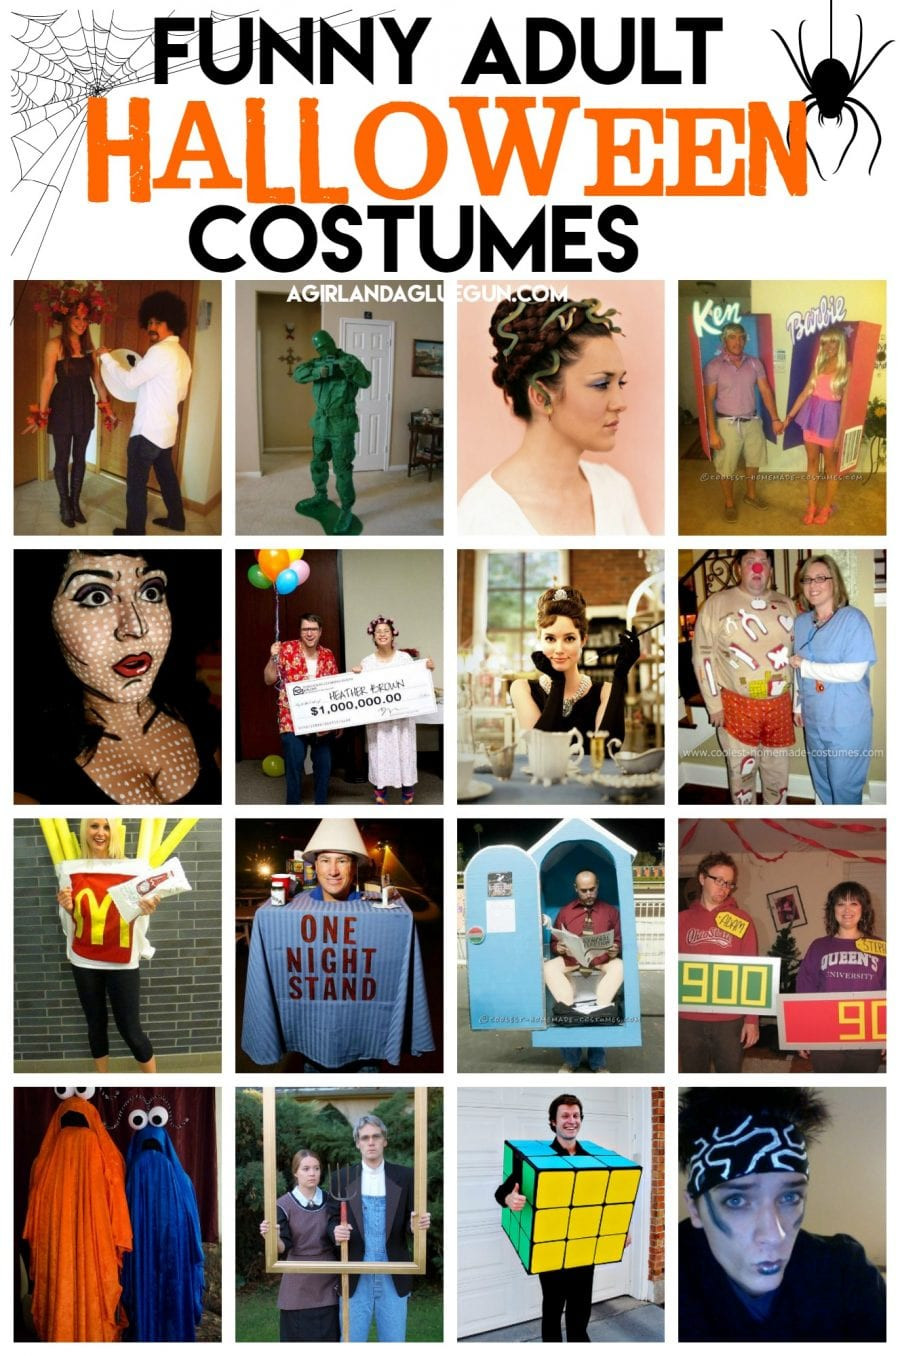 DIY Adults Halloween Costumes
 Funny Halloween Costumes for Adults that you can DIY A